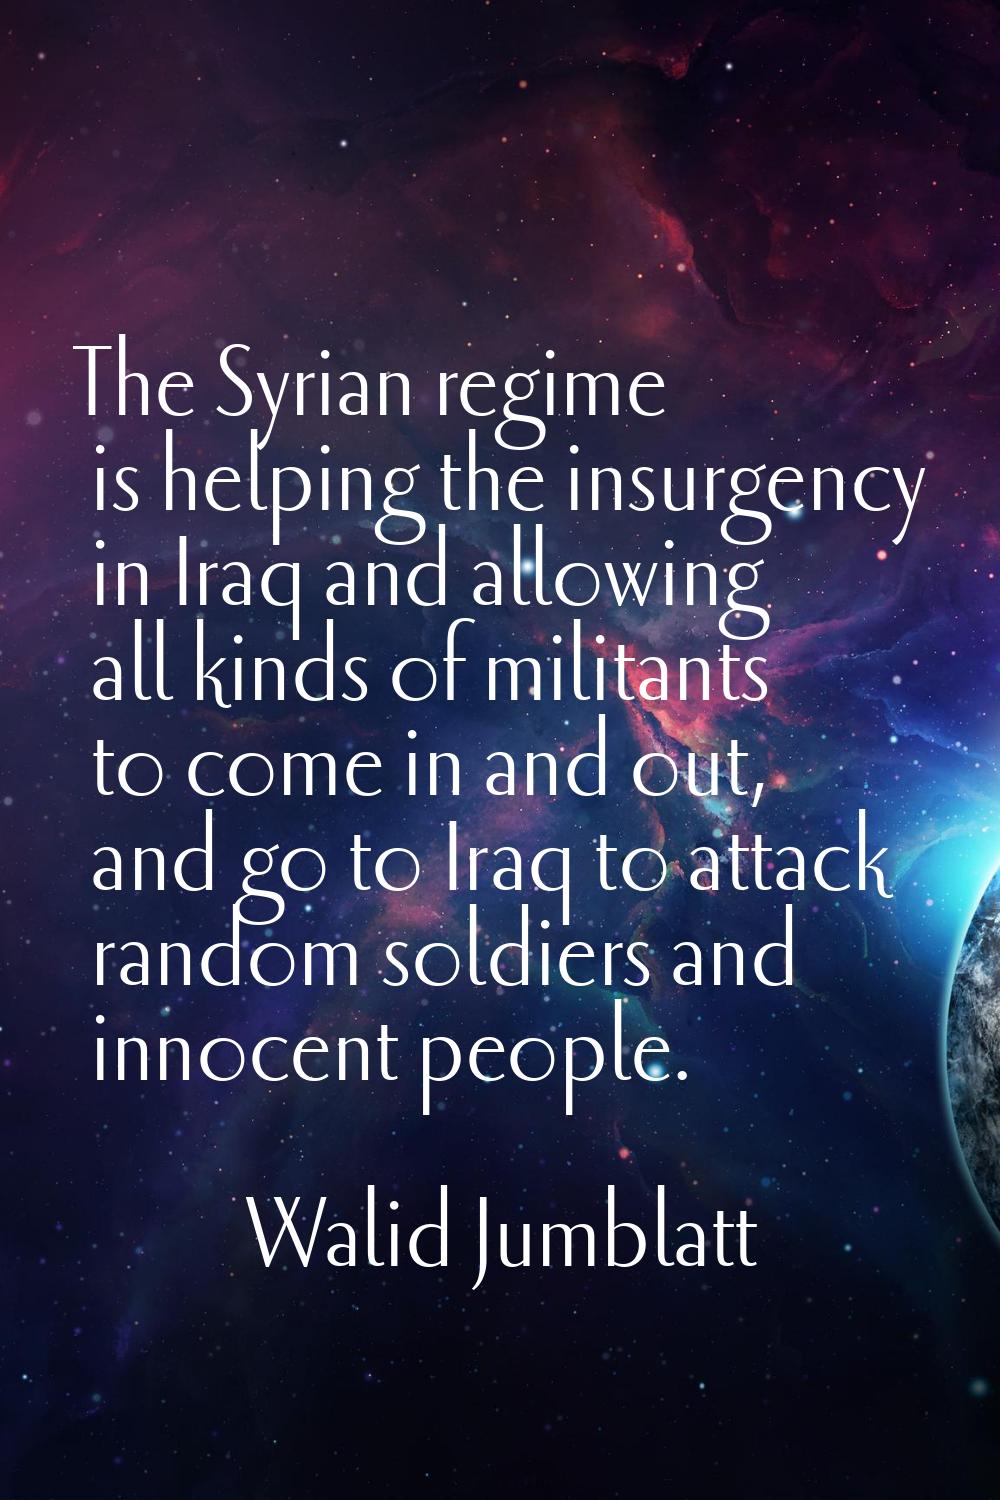 The Syrian regime is helping the insurgency in Iraq and allowing all kinds of militants to come in 